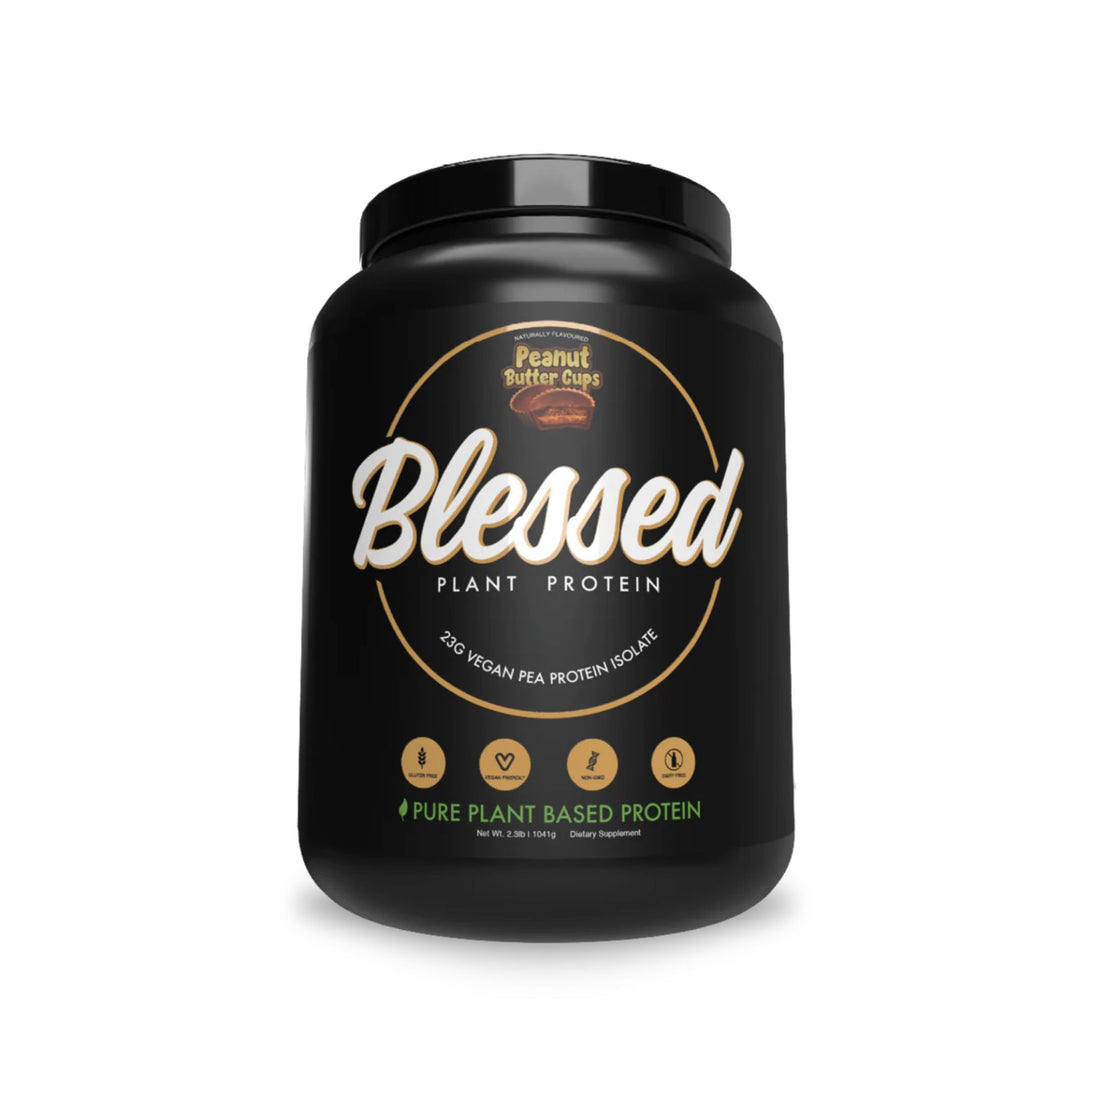 Blessed Protein - Peanut Butter Cup Clearance